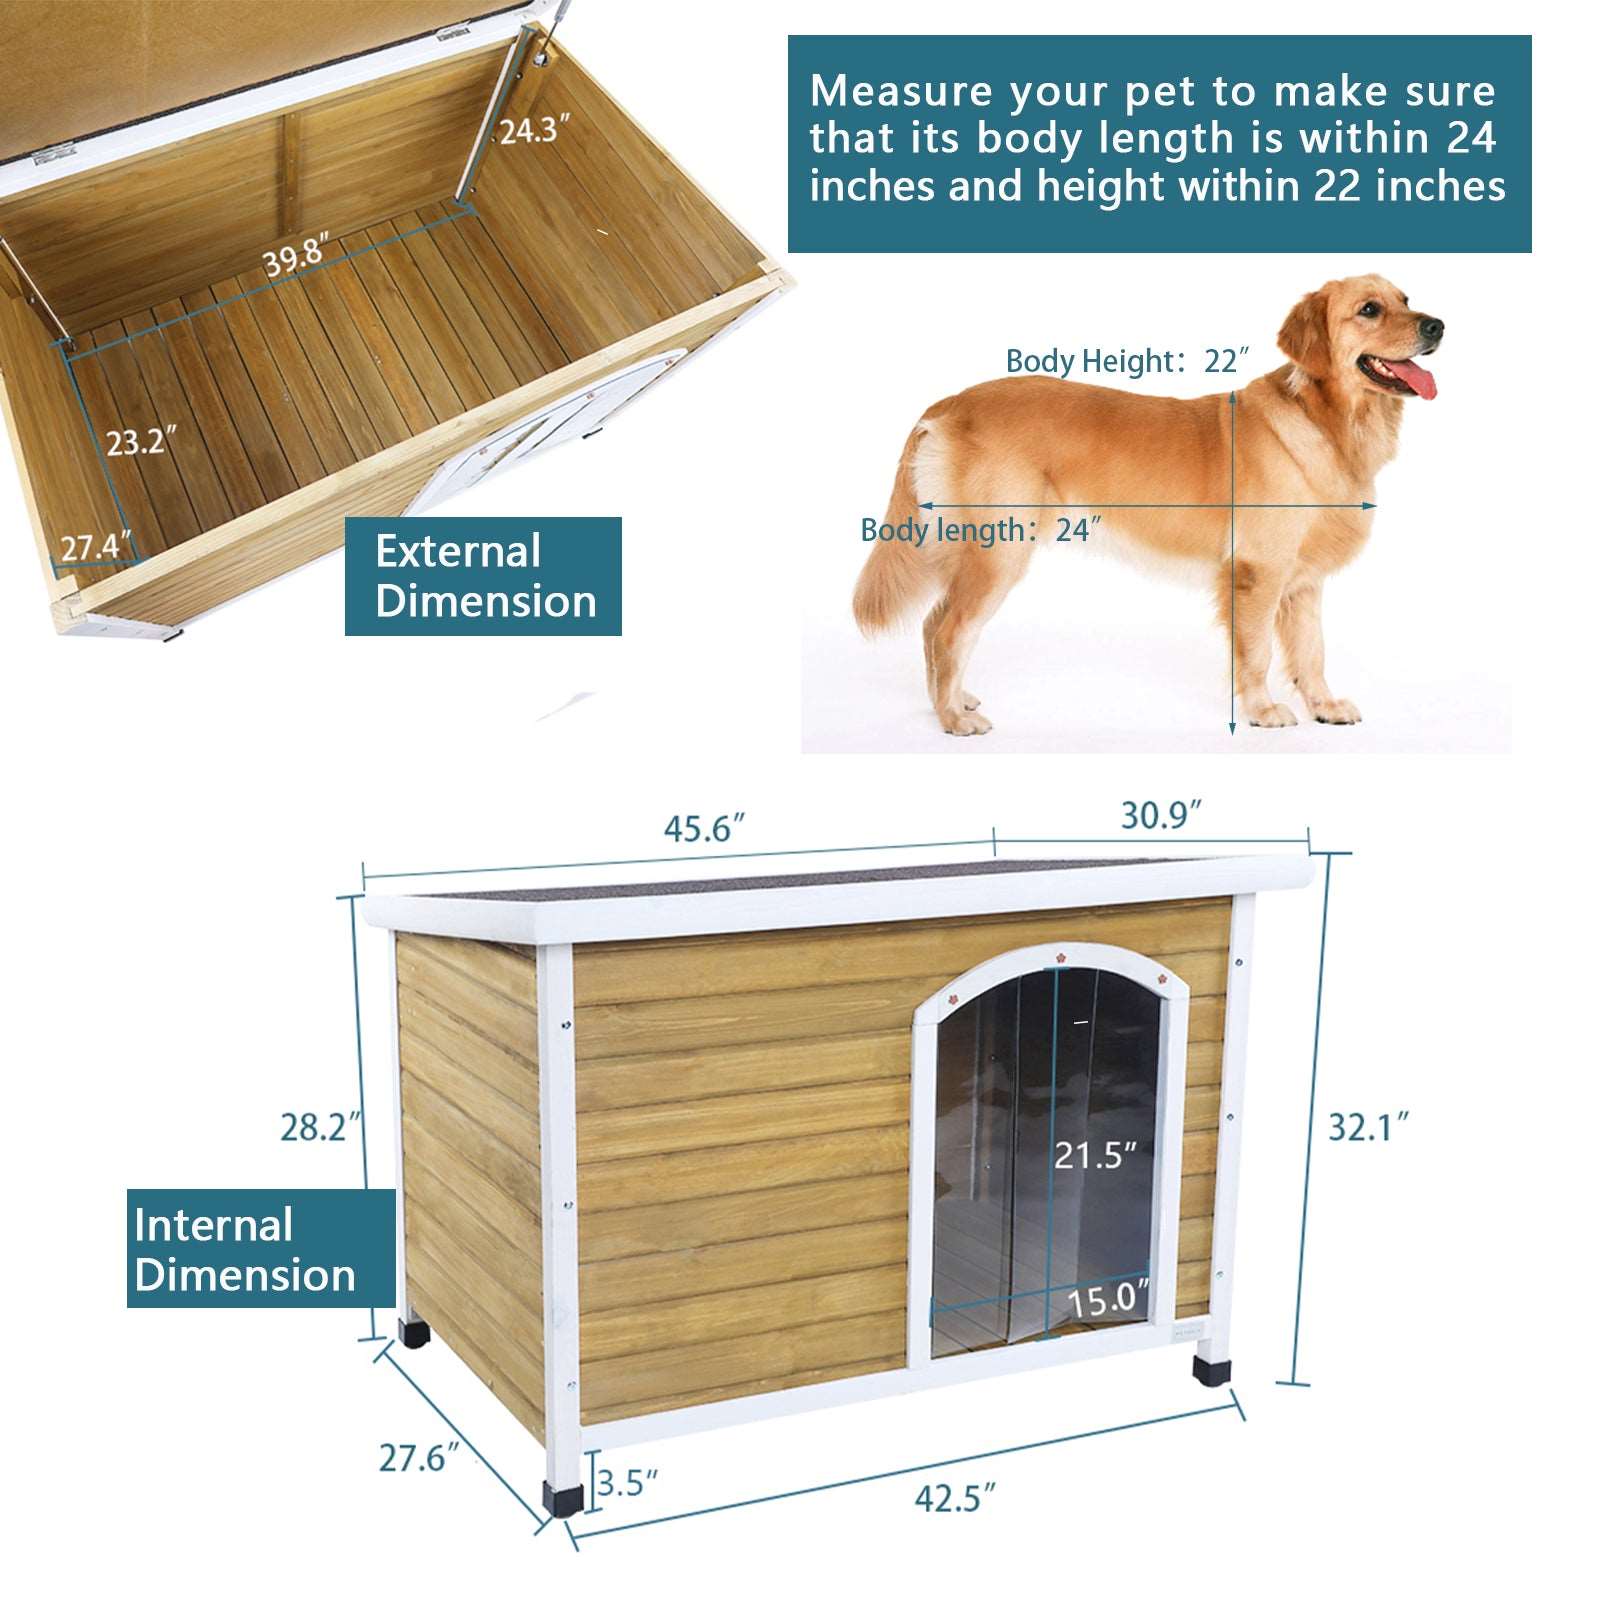 Petsfit-Wooden-Dog-House-for-Medium-to-Large-Dogs-02